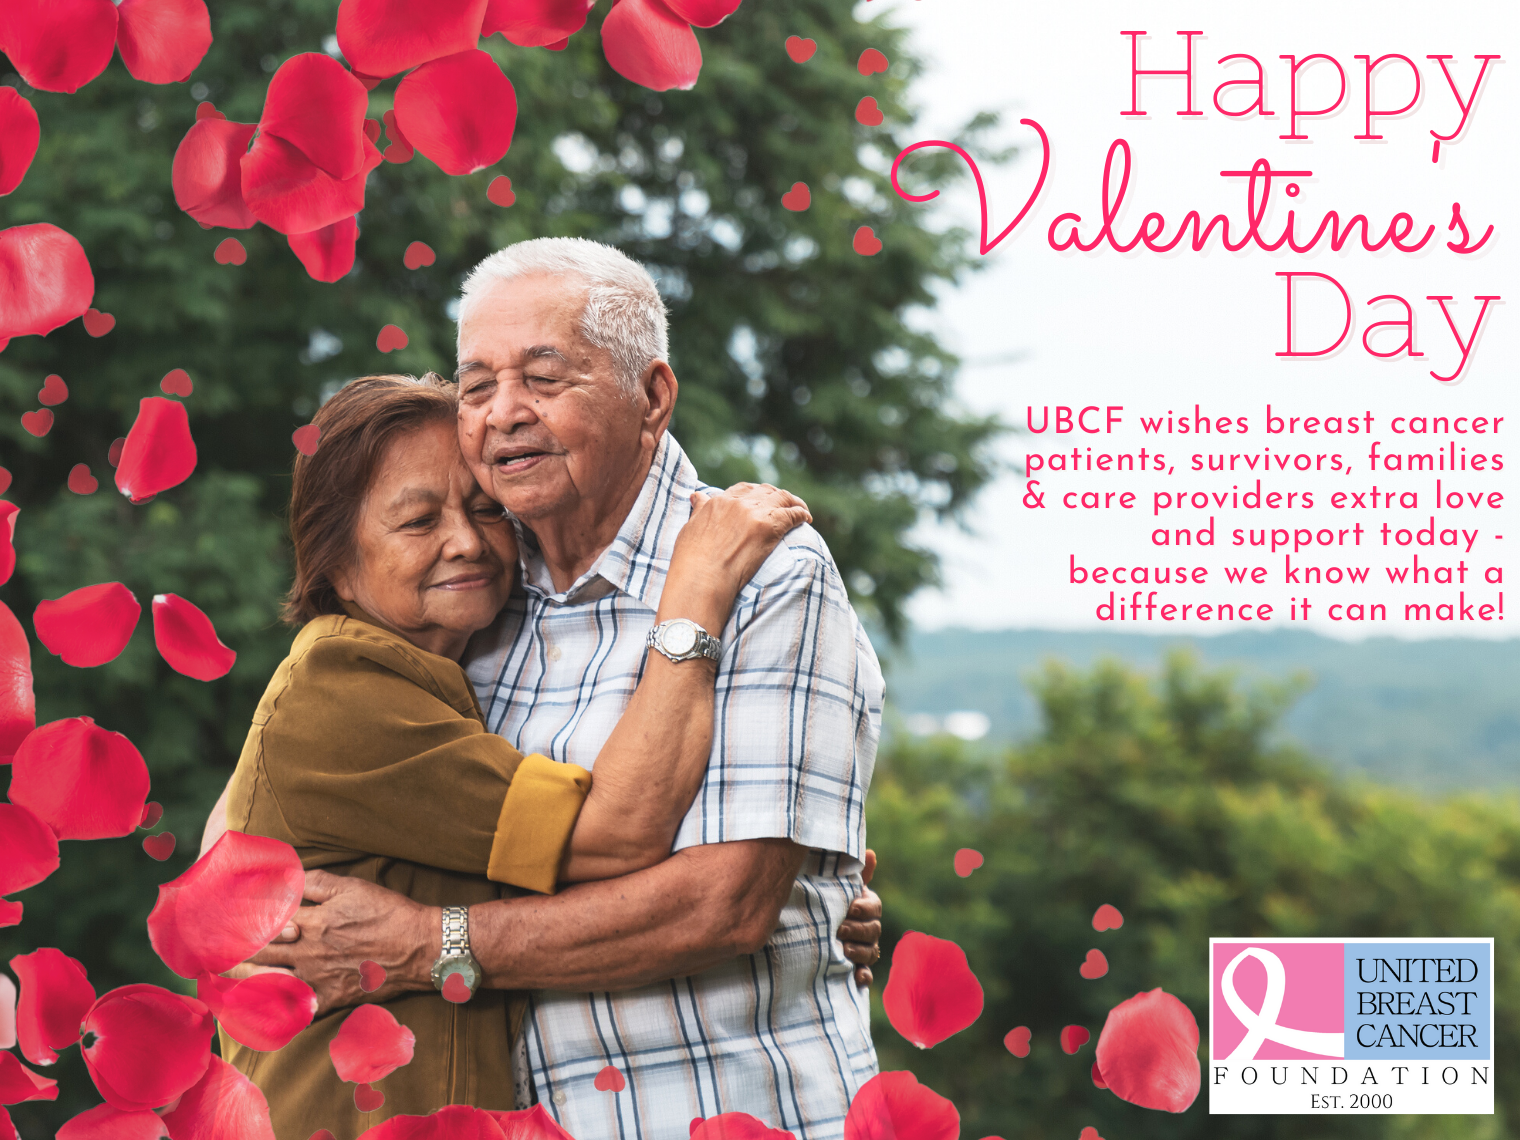 UBCF wishes breast cancer patients, survivors, families & care givers a happy Valentine's Day!